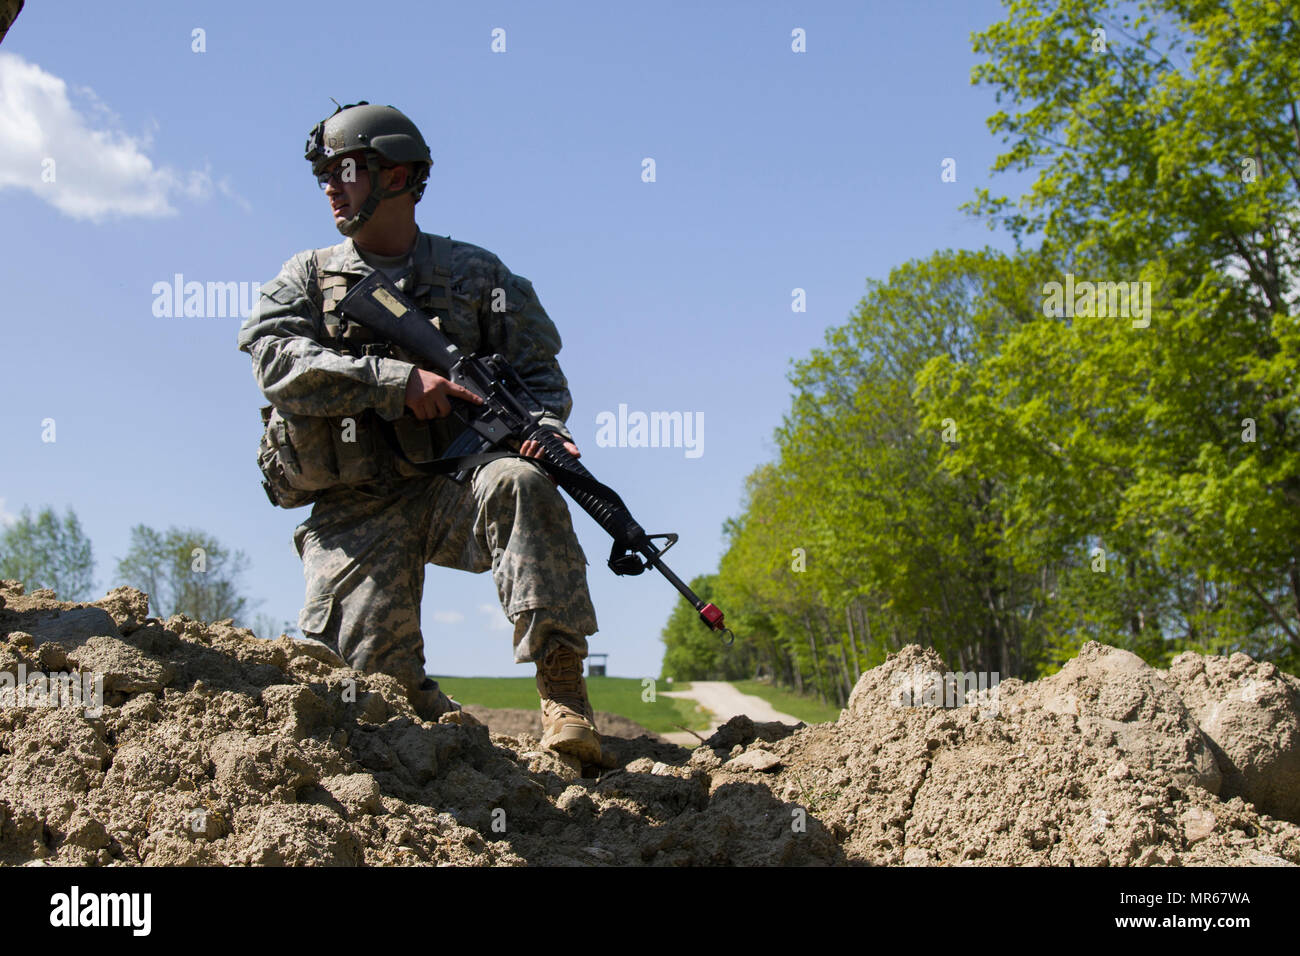 A U.S. Army officer candidate observes soldiers clearing a make-shift bunker during a bunker clearing lane at New Hampshire National Guard Training Site in Center Strafford, Nh., May 19, 2017. Soldiers from Connecticut, Maine, Massachusetts, New Hampshire, New Jersey, New York, Rhode Island, and Vermont participated in the Officer Candidate School Field Leadership Exercise in preparation for graduation and commission. (U.S. Army National Guard photo by Spc. Avery Cunningham) Stock Photo